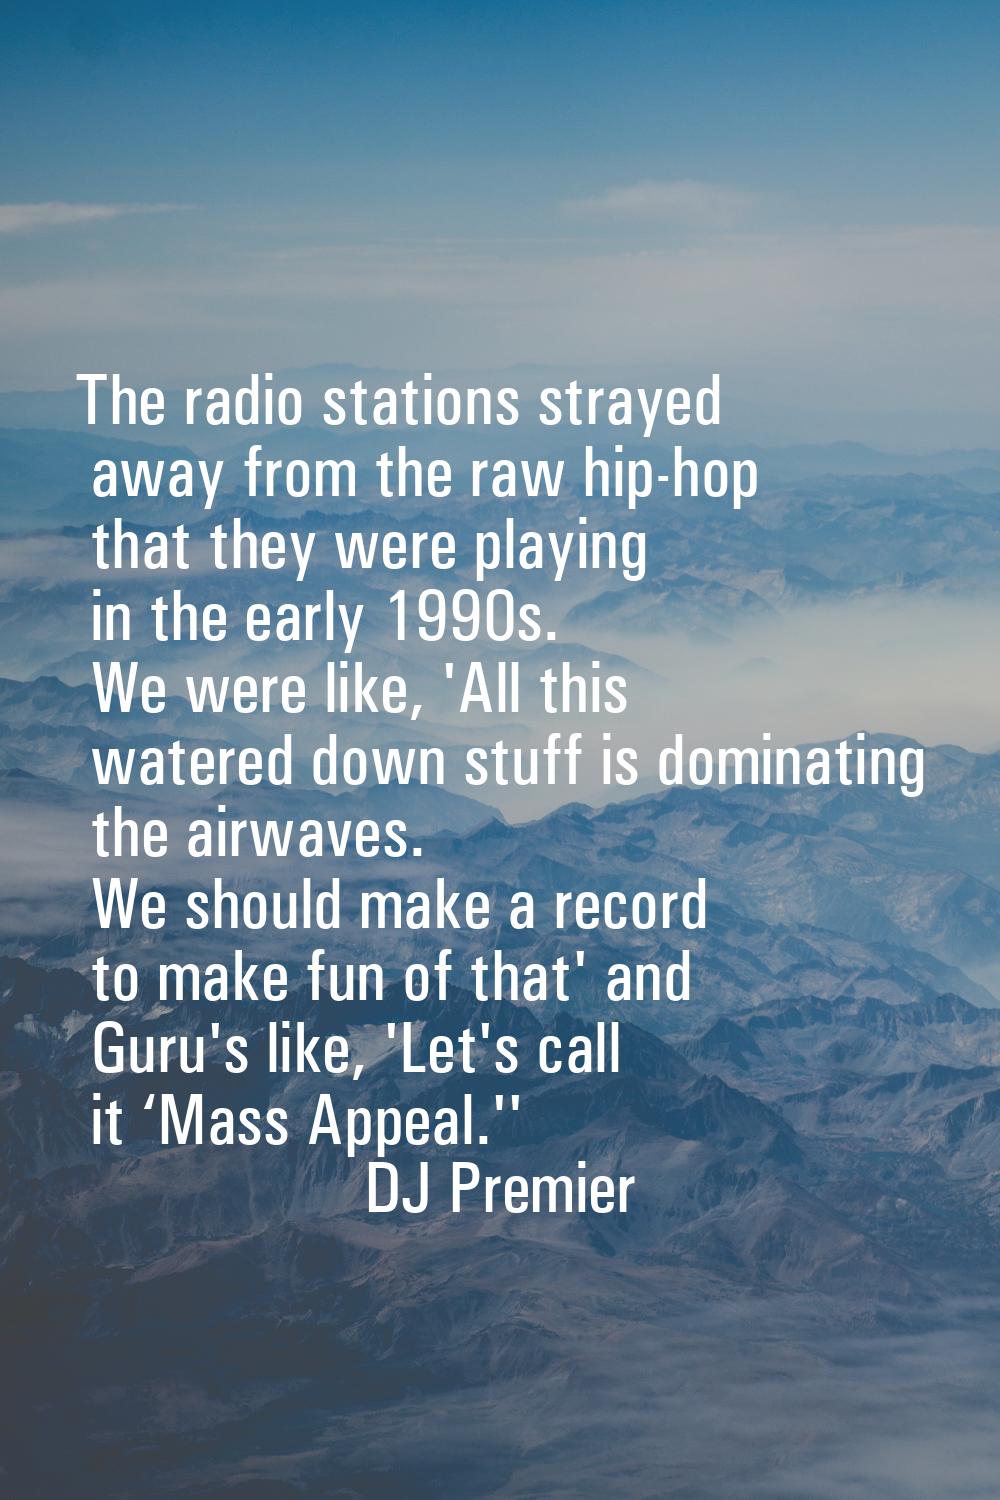 The radio stations strayed away from the raw hip-hop that they were playing in the early 1990s. We 